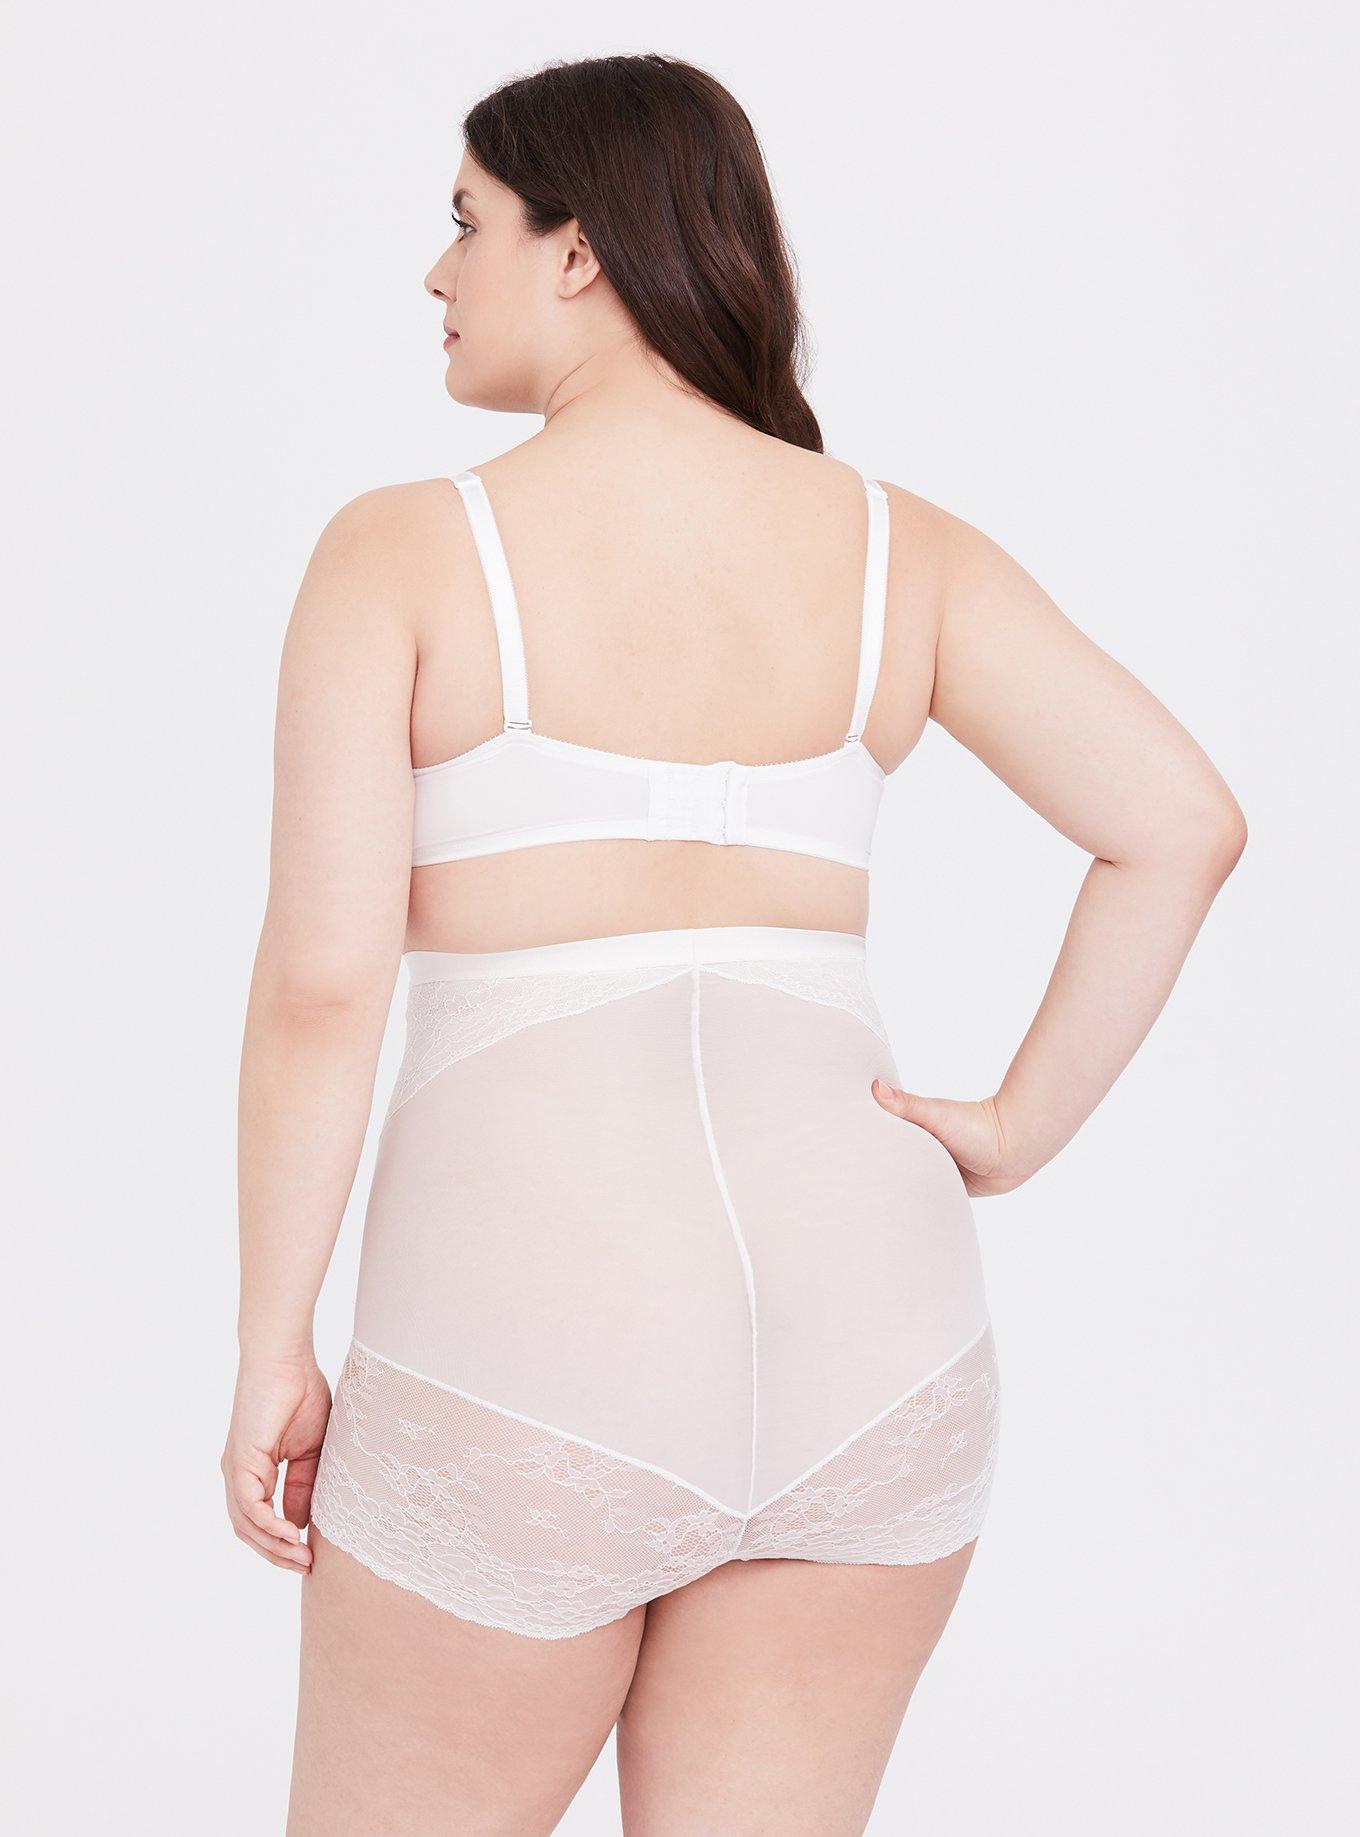 Spanx Spotlight On Lace Pretty High Waist Firm Control Briefs Review – The  Magic Knicker Shop